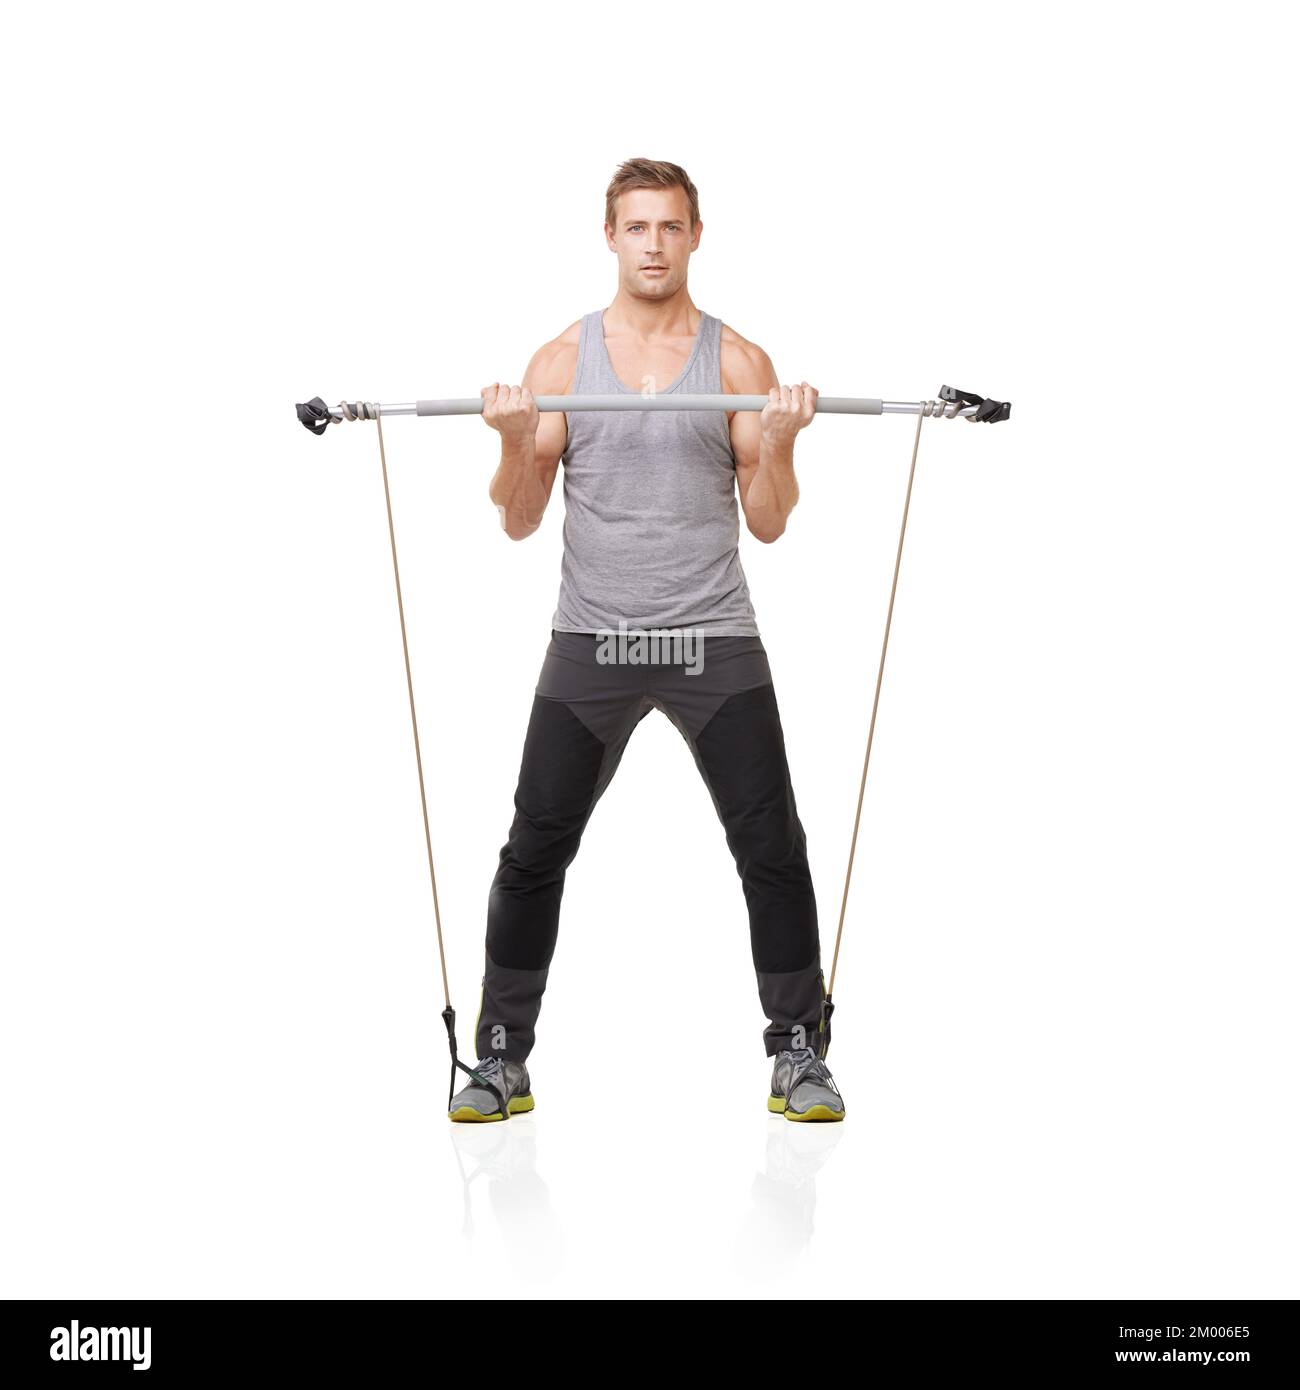 Working towards the body he desires. A young man working his upper body with a resistance band. Stock Photo